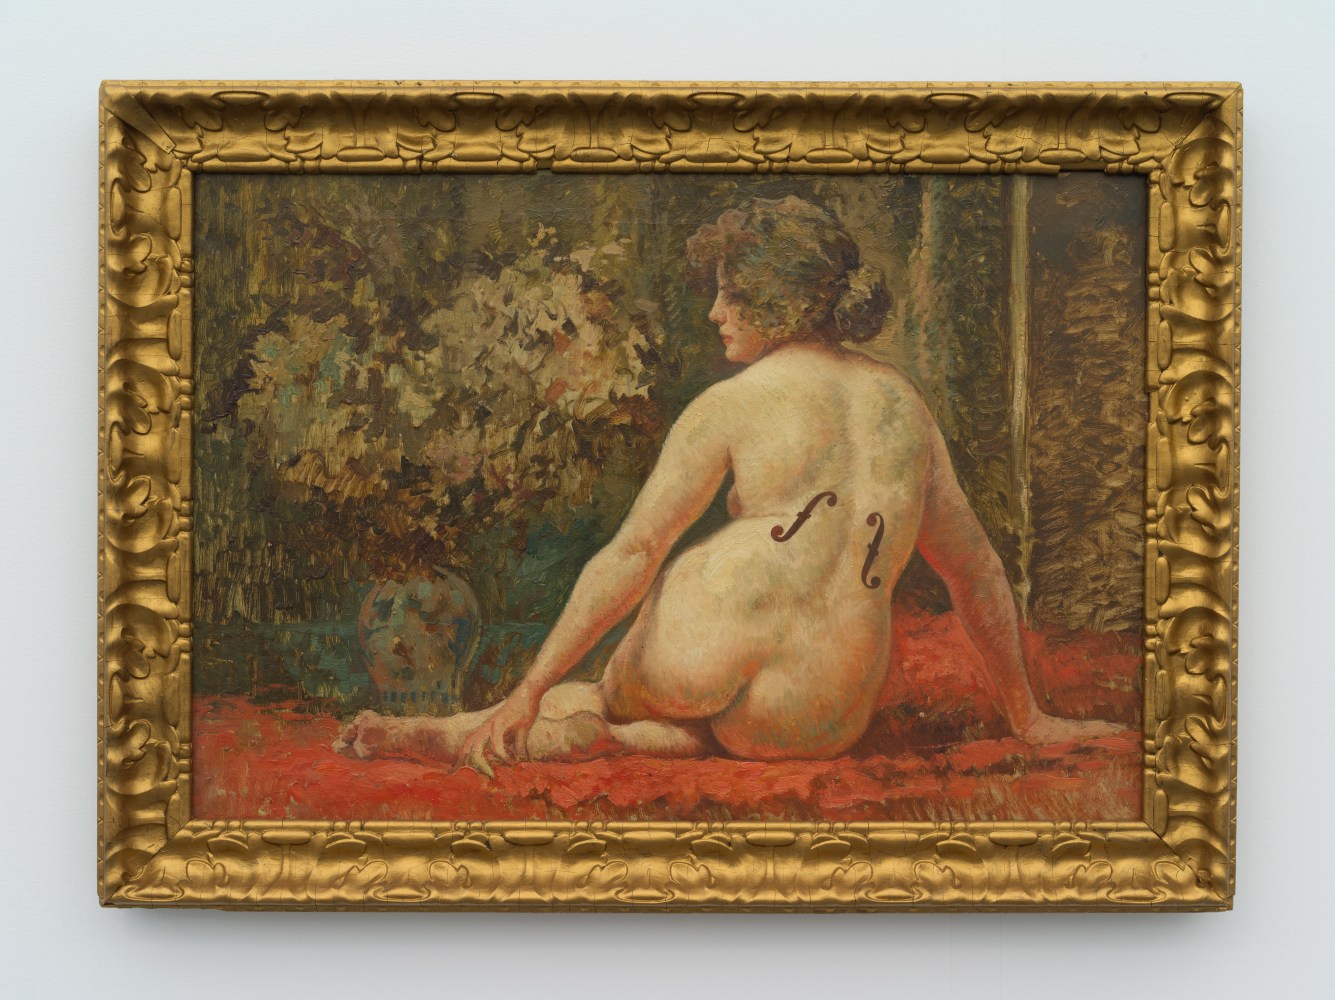 Hans-Peter Feldmann

Nude with Man Ray marks

Oil on canvas, framed

31 1/2 x 44 inches (66 x 95.9 cm)

HPF 373

&amp;nbsp;

INQUIRE